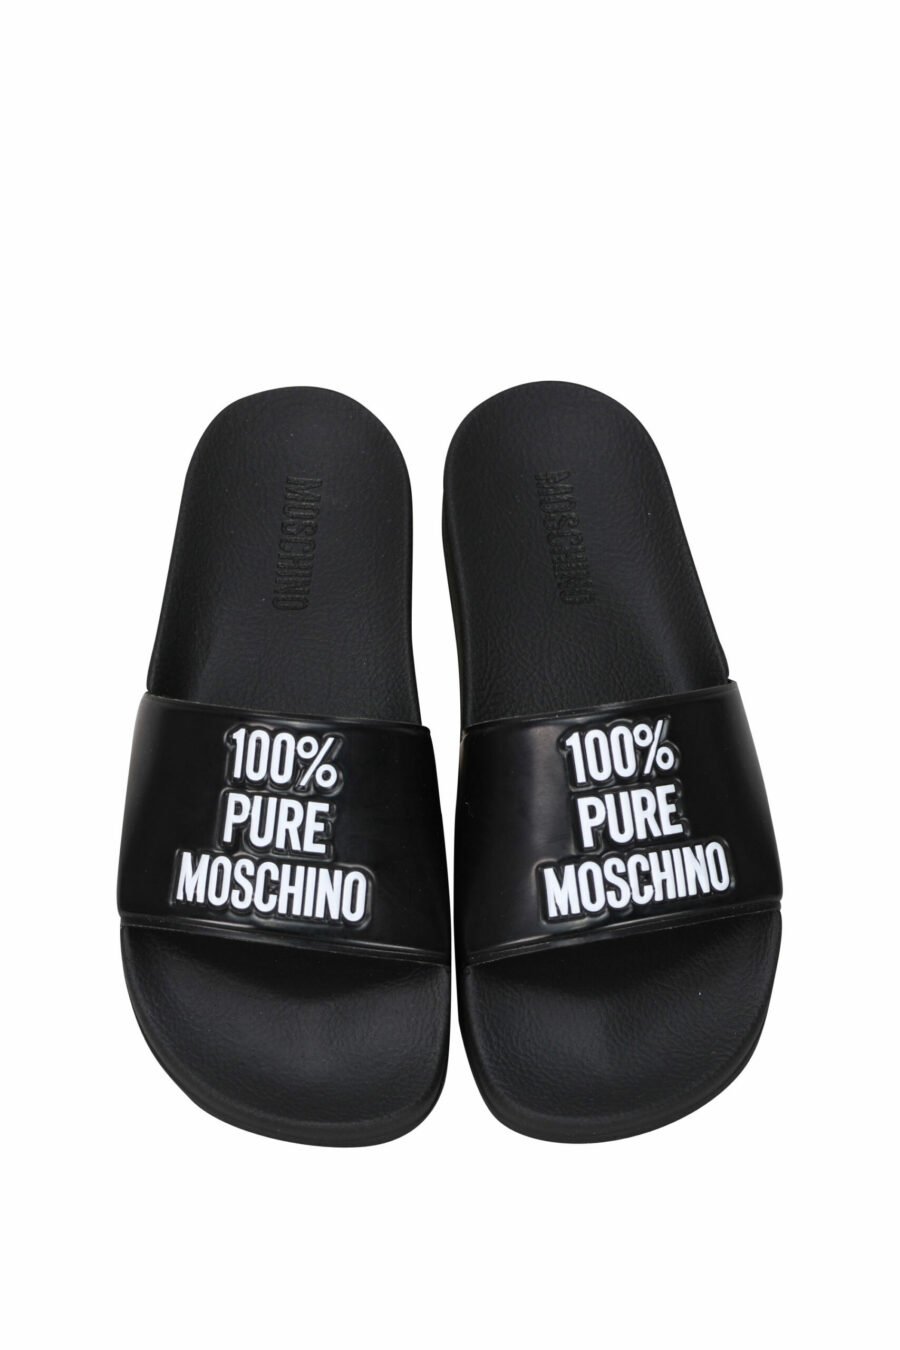 Black flip flops with logo "100% pure moschino" - 8054388527972 4 scaled